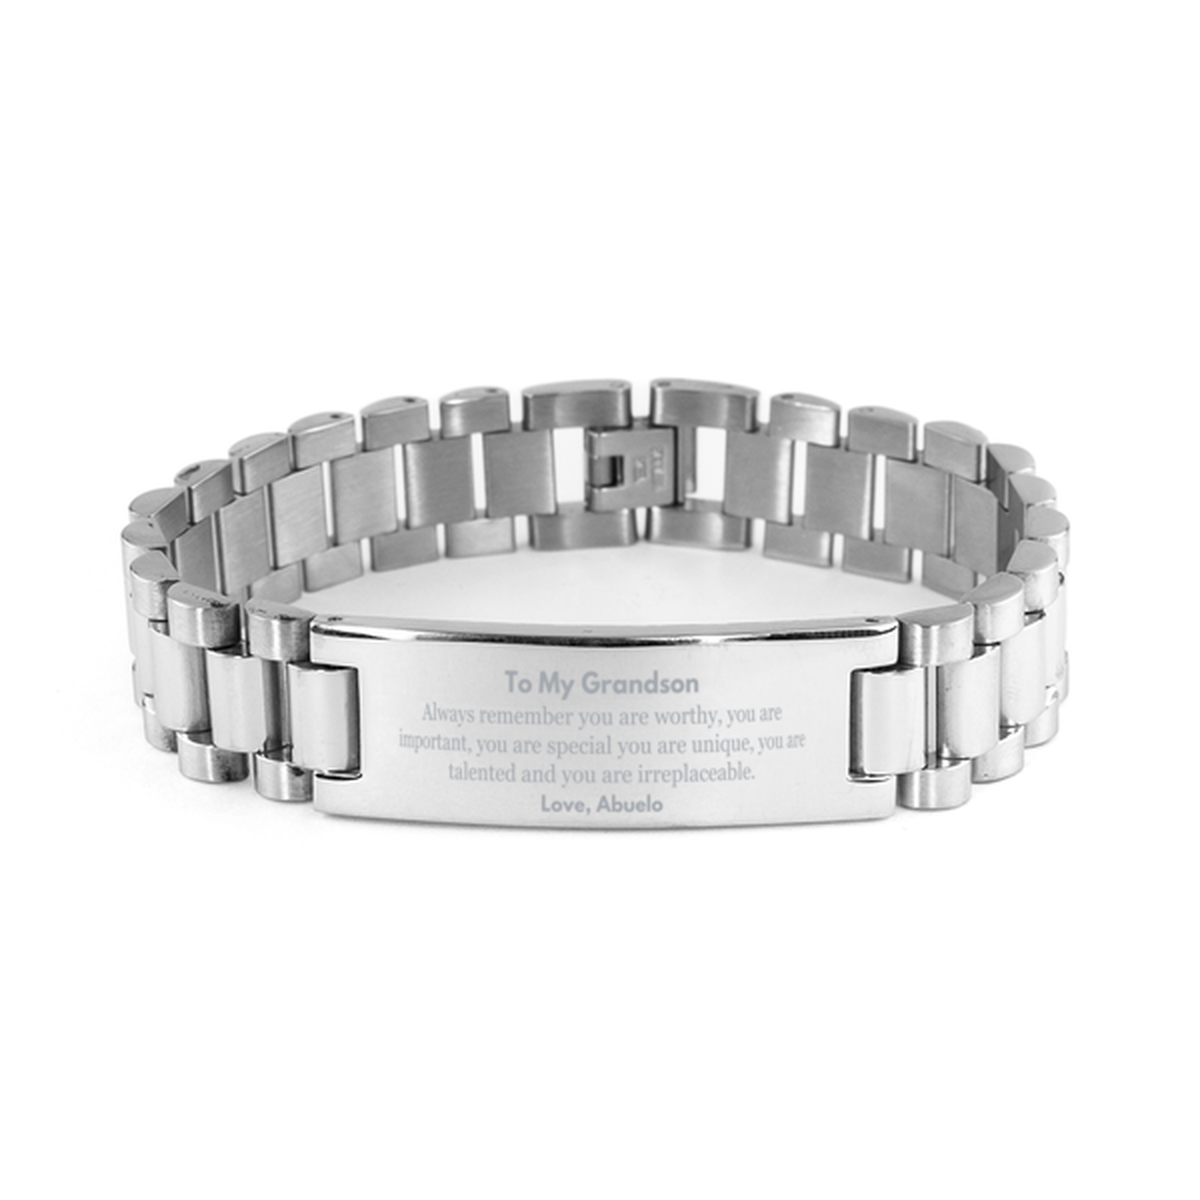 Grandson Birthday Gifts from Abuelo, Inspirational Ladder Stainless Steel Bracelet for Grandson Christmas Graduation Gifts for Grandson Always remember you are worthy, you are important. Love, Abuelo